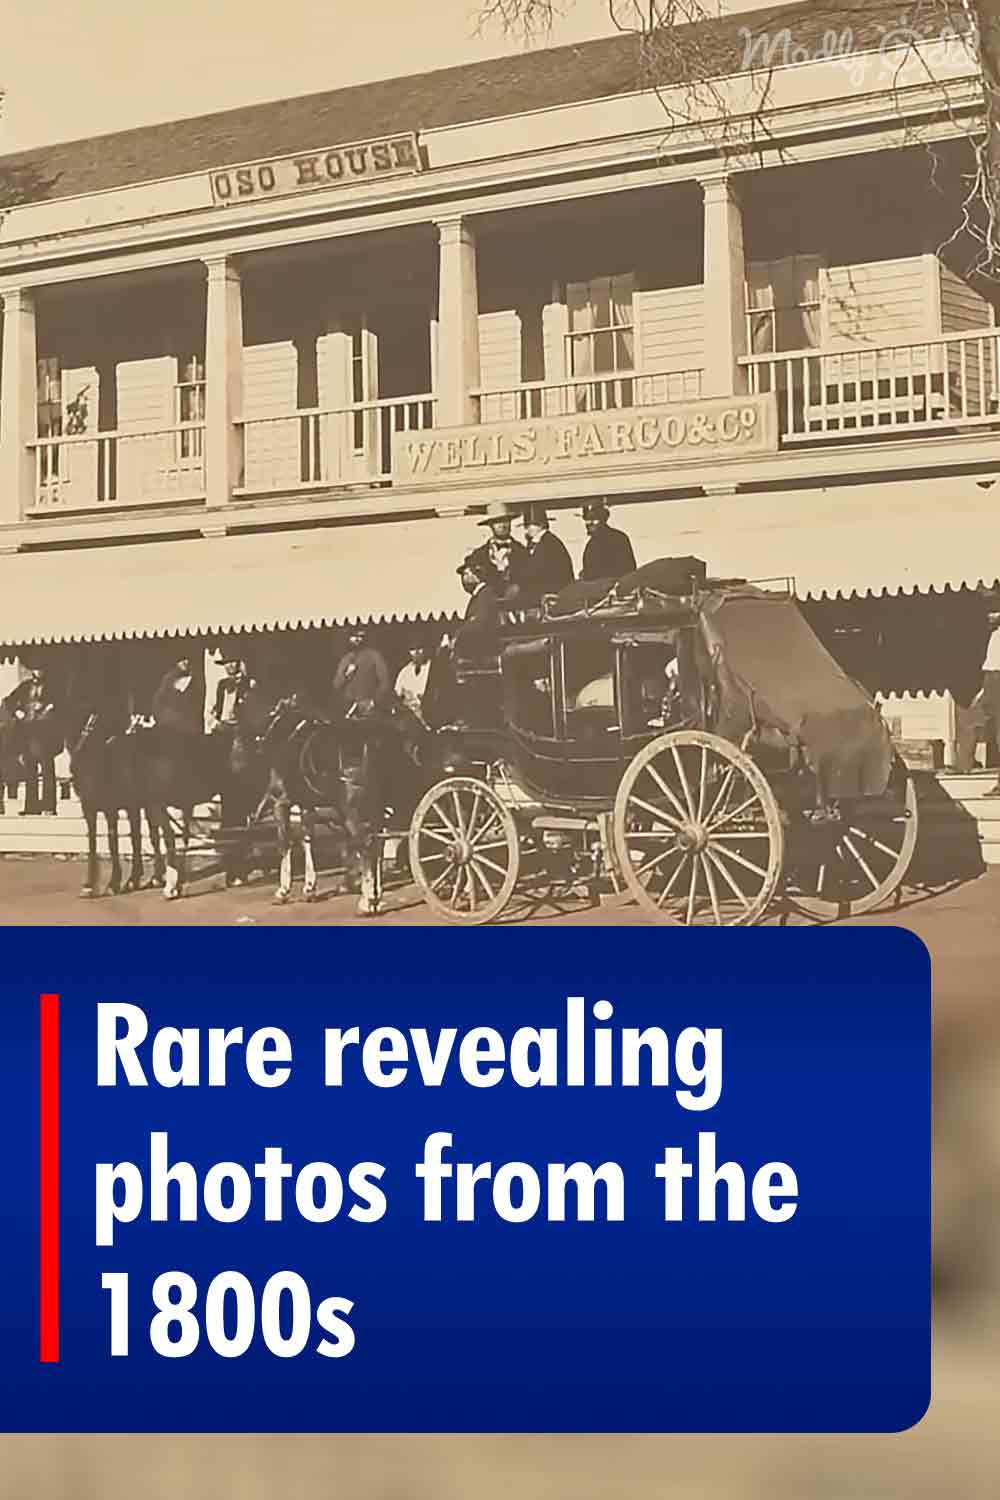 Rare revealing photos from the 1800s